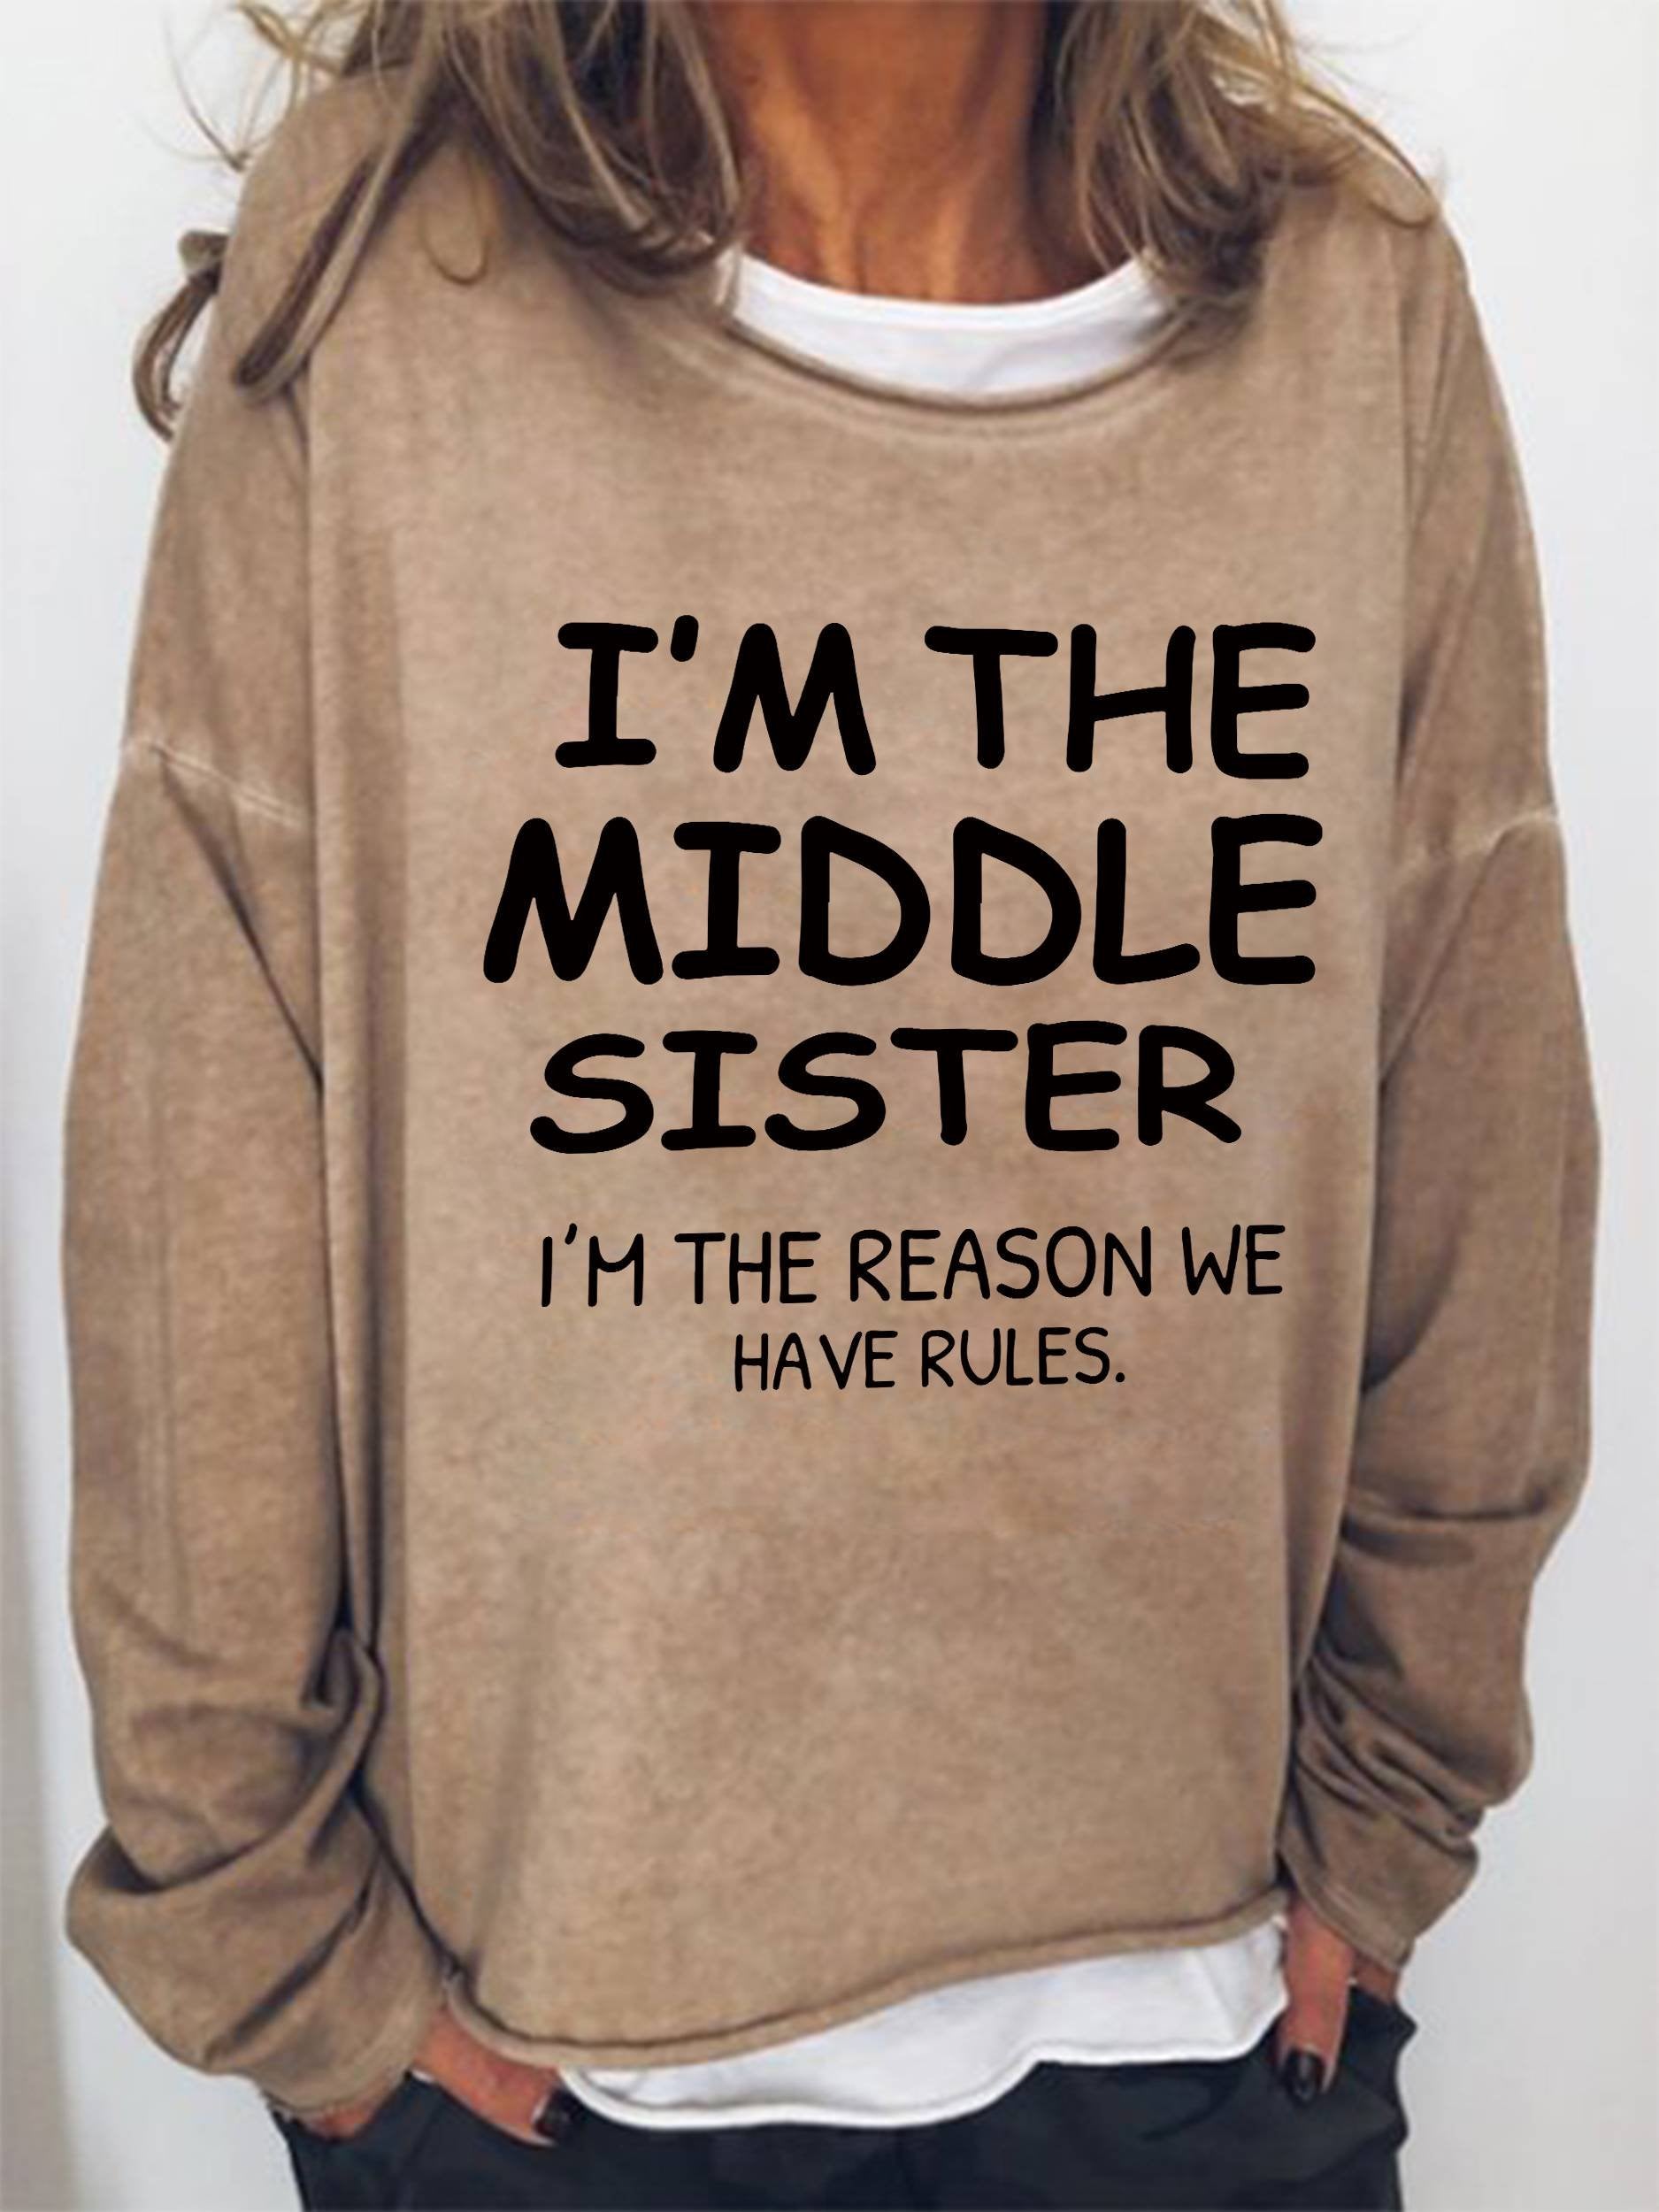 I'm The Middle Sister I'm The Reason We Have Rules Funny Long Sleeve Top - Outlets Forever